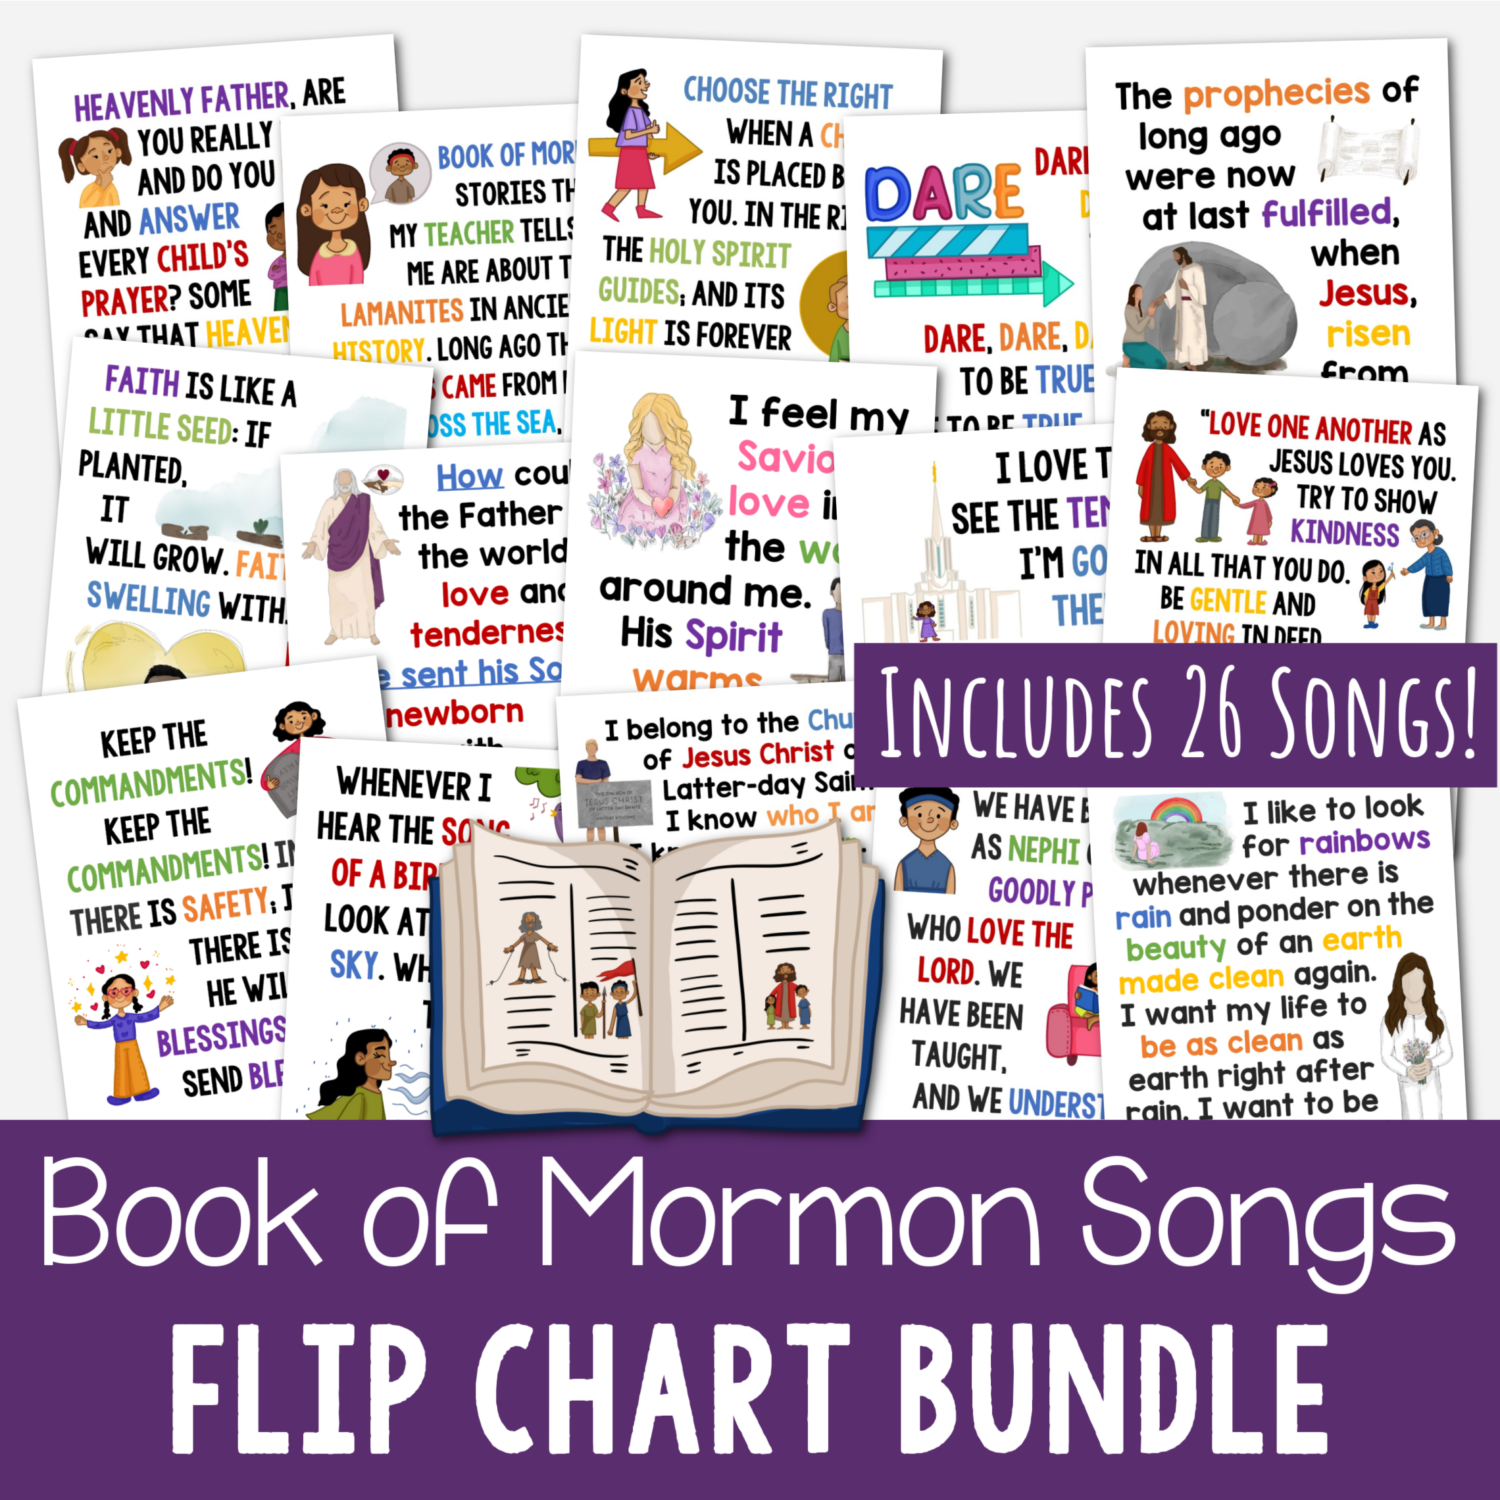 Book of Mormon Flip Charts MEGA Bundle! Includes 26 flip charts for songs from the Come Follow Me Book of Mormon song lists. This set will help you be prepared to teach songs from this list all through the year!